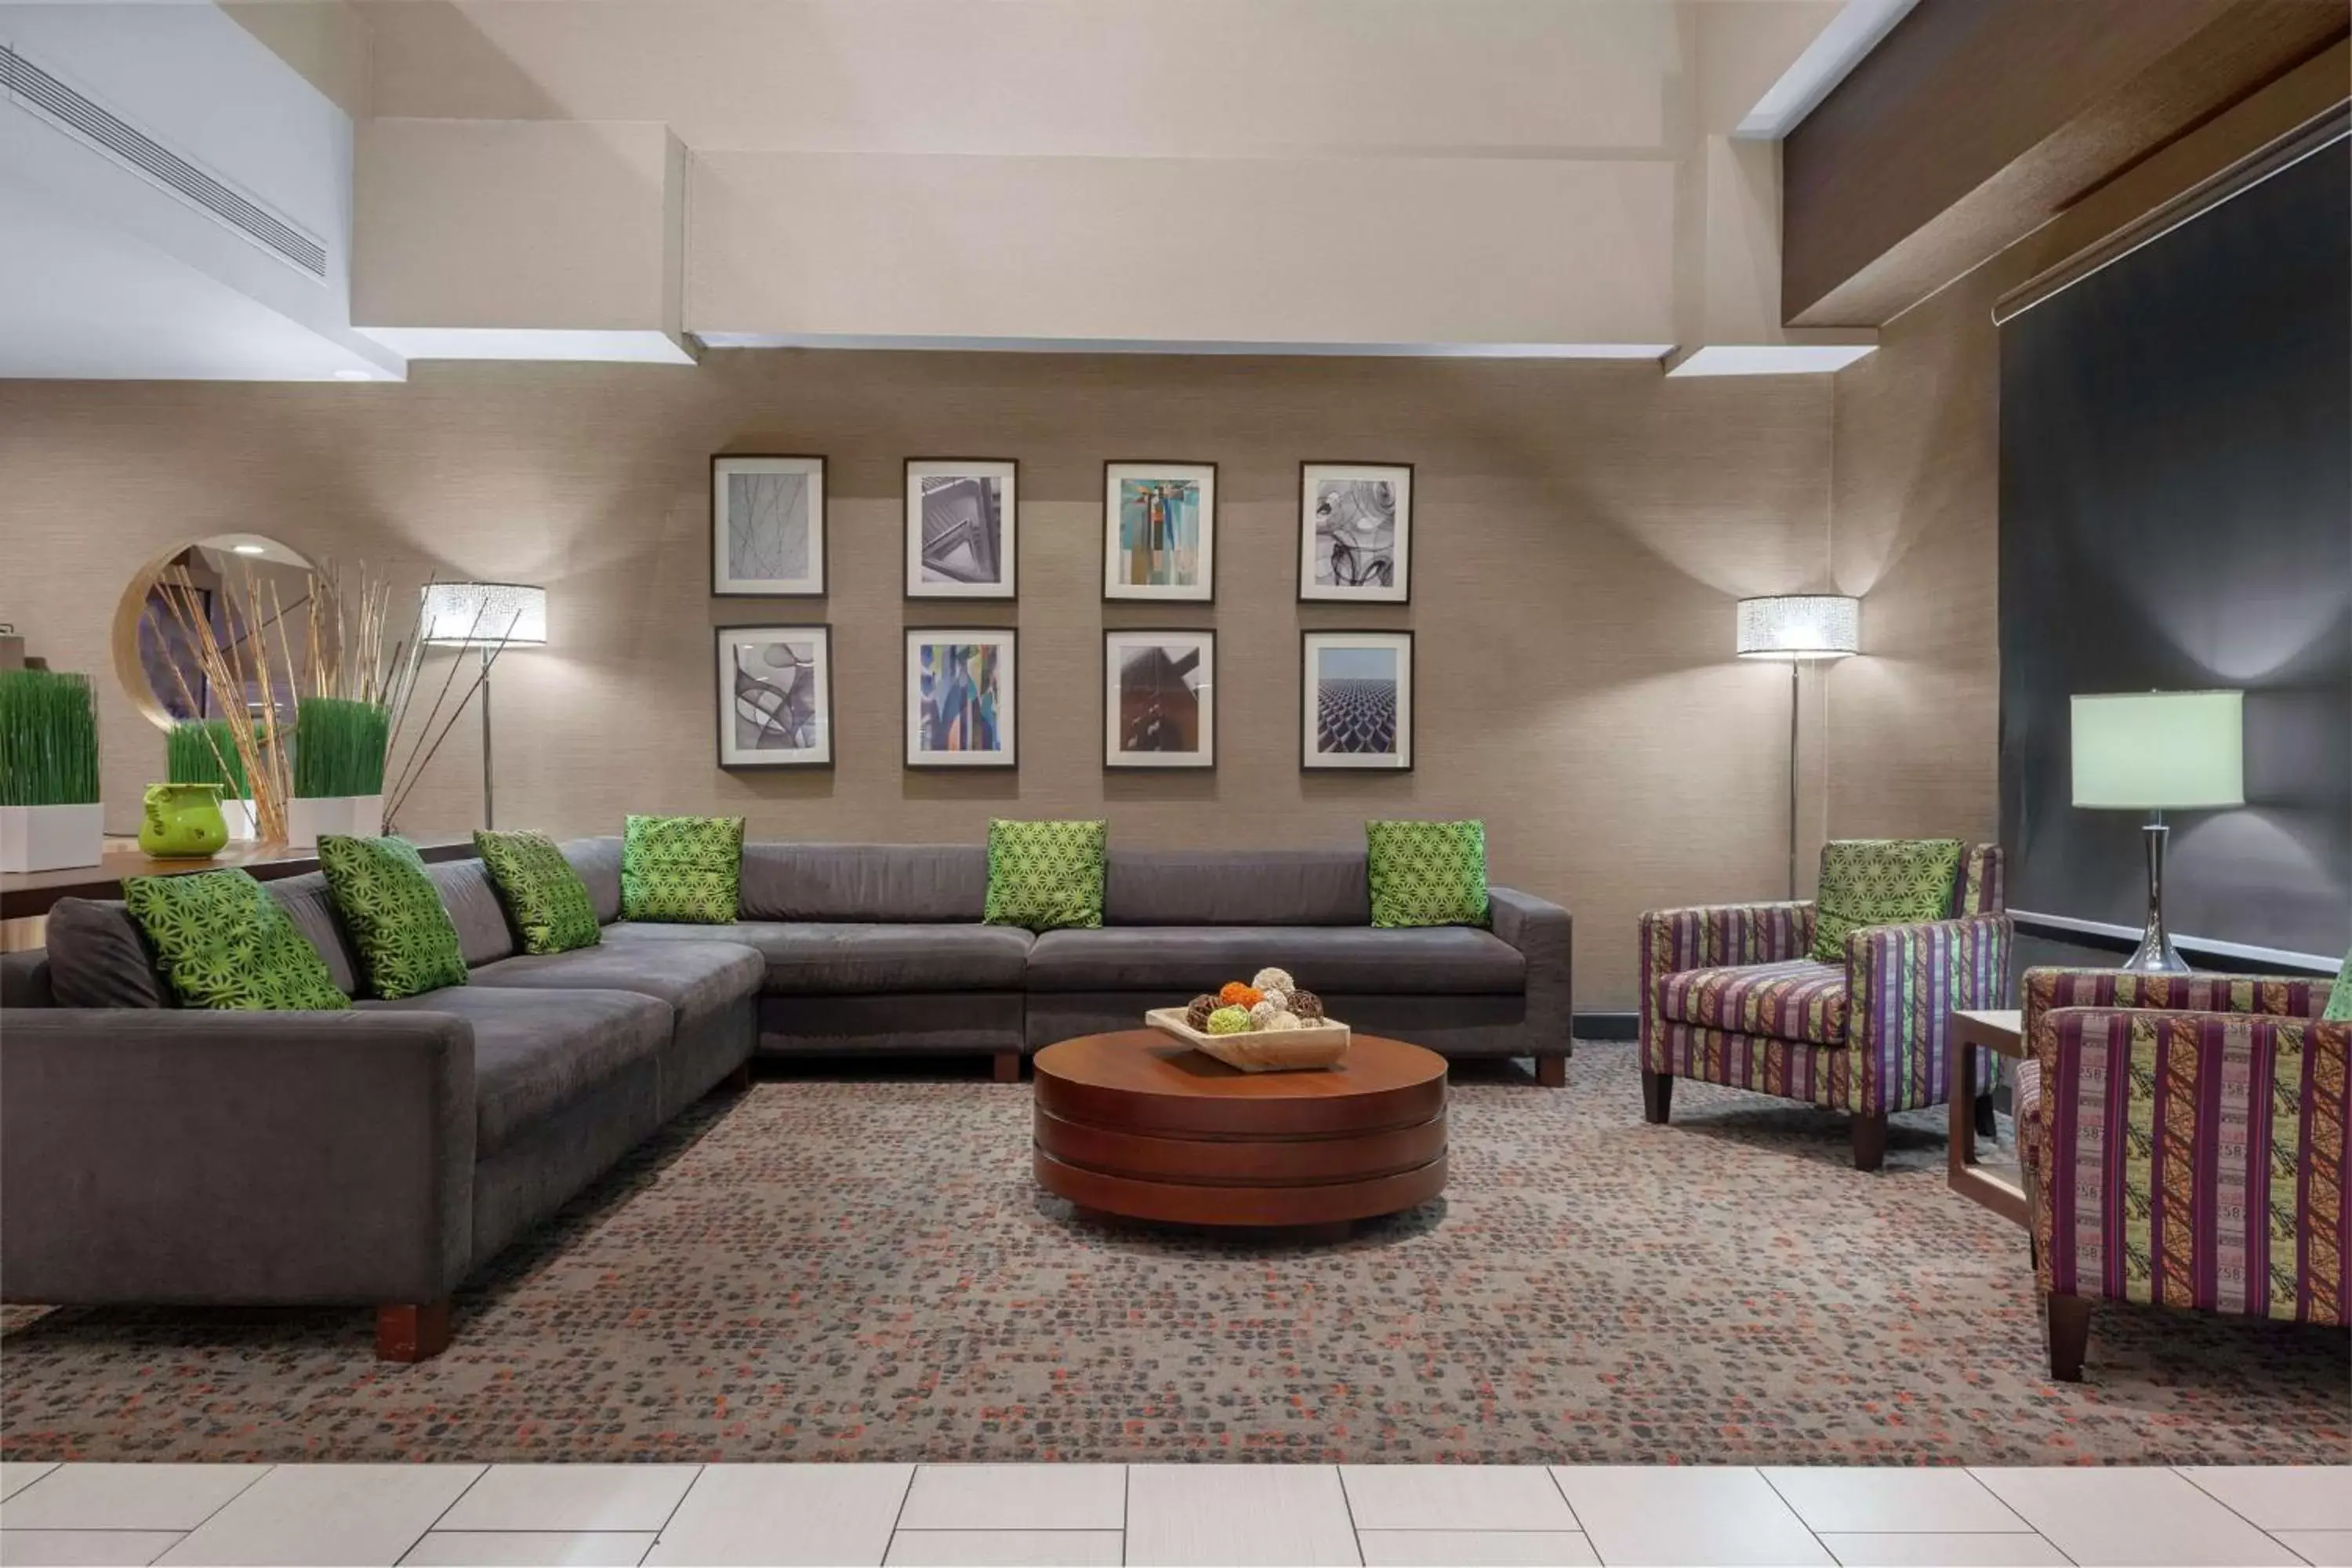 Lobby or reception, Lobby/Reception in DoubleTree Suites by Hilton Dayton/Miamisburg